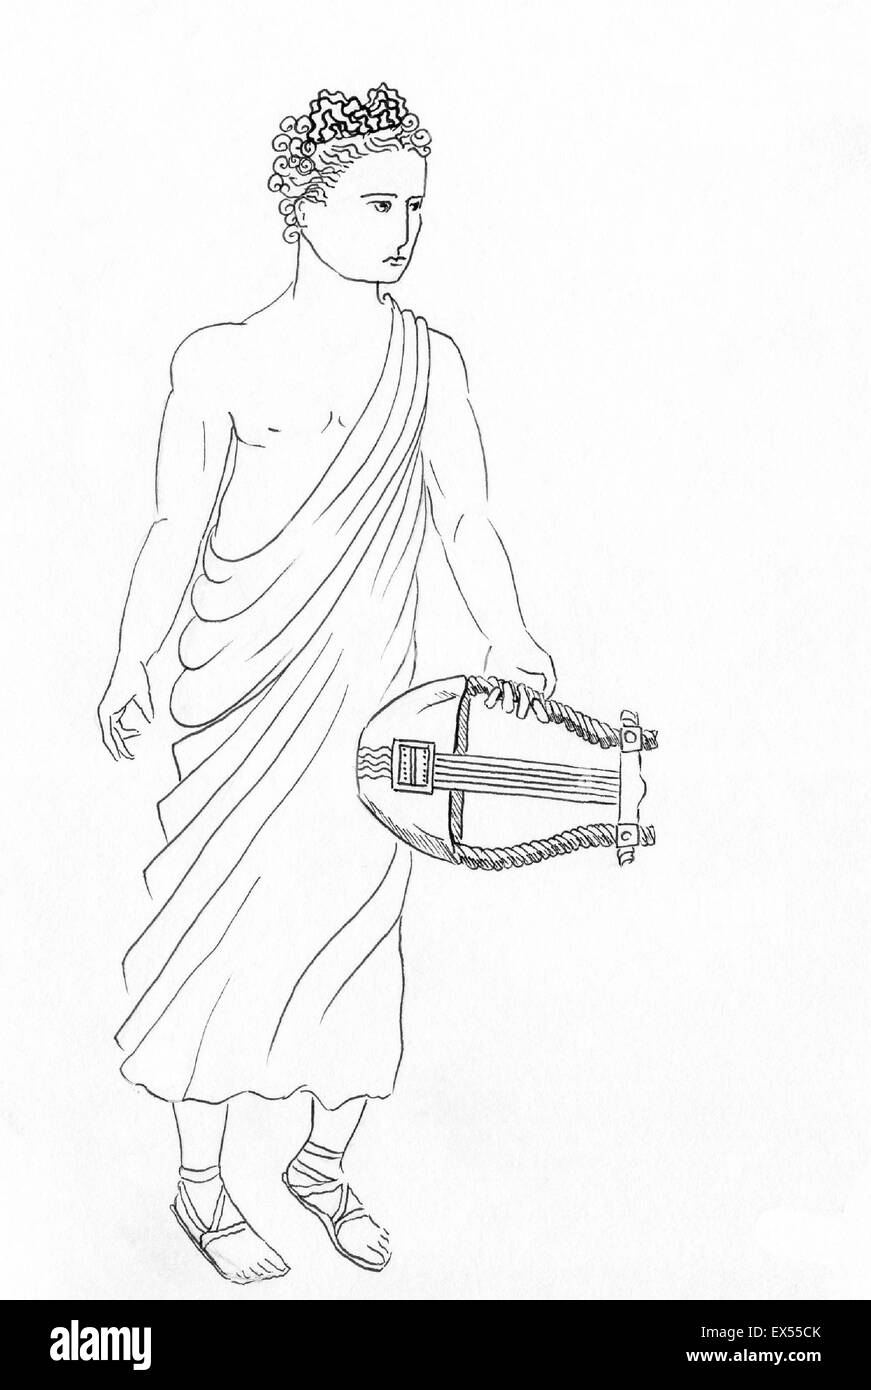 Line drawing of Apollo, Greek Roman god of music and light. Stock Photo